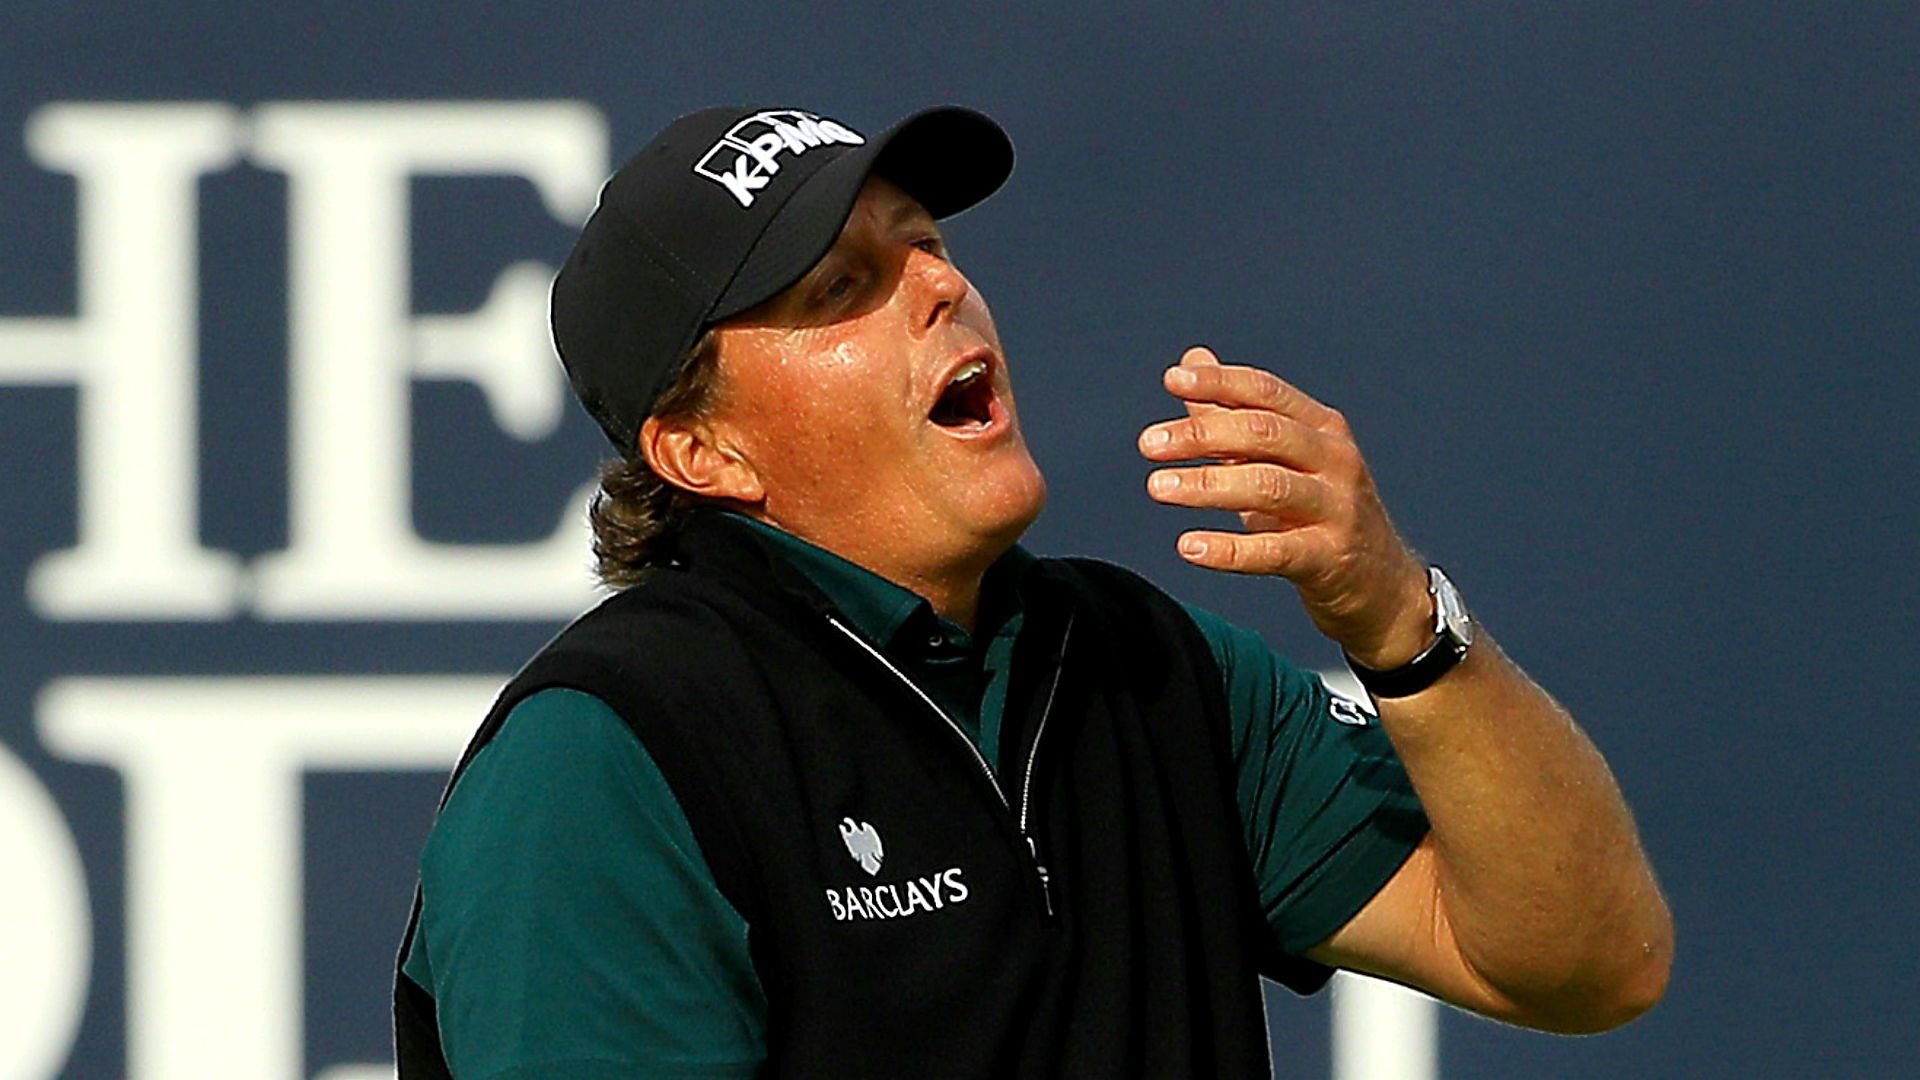 Phil mickelson asshole